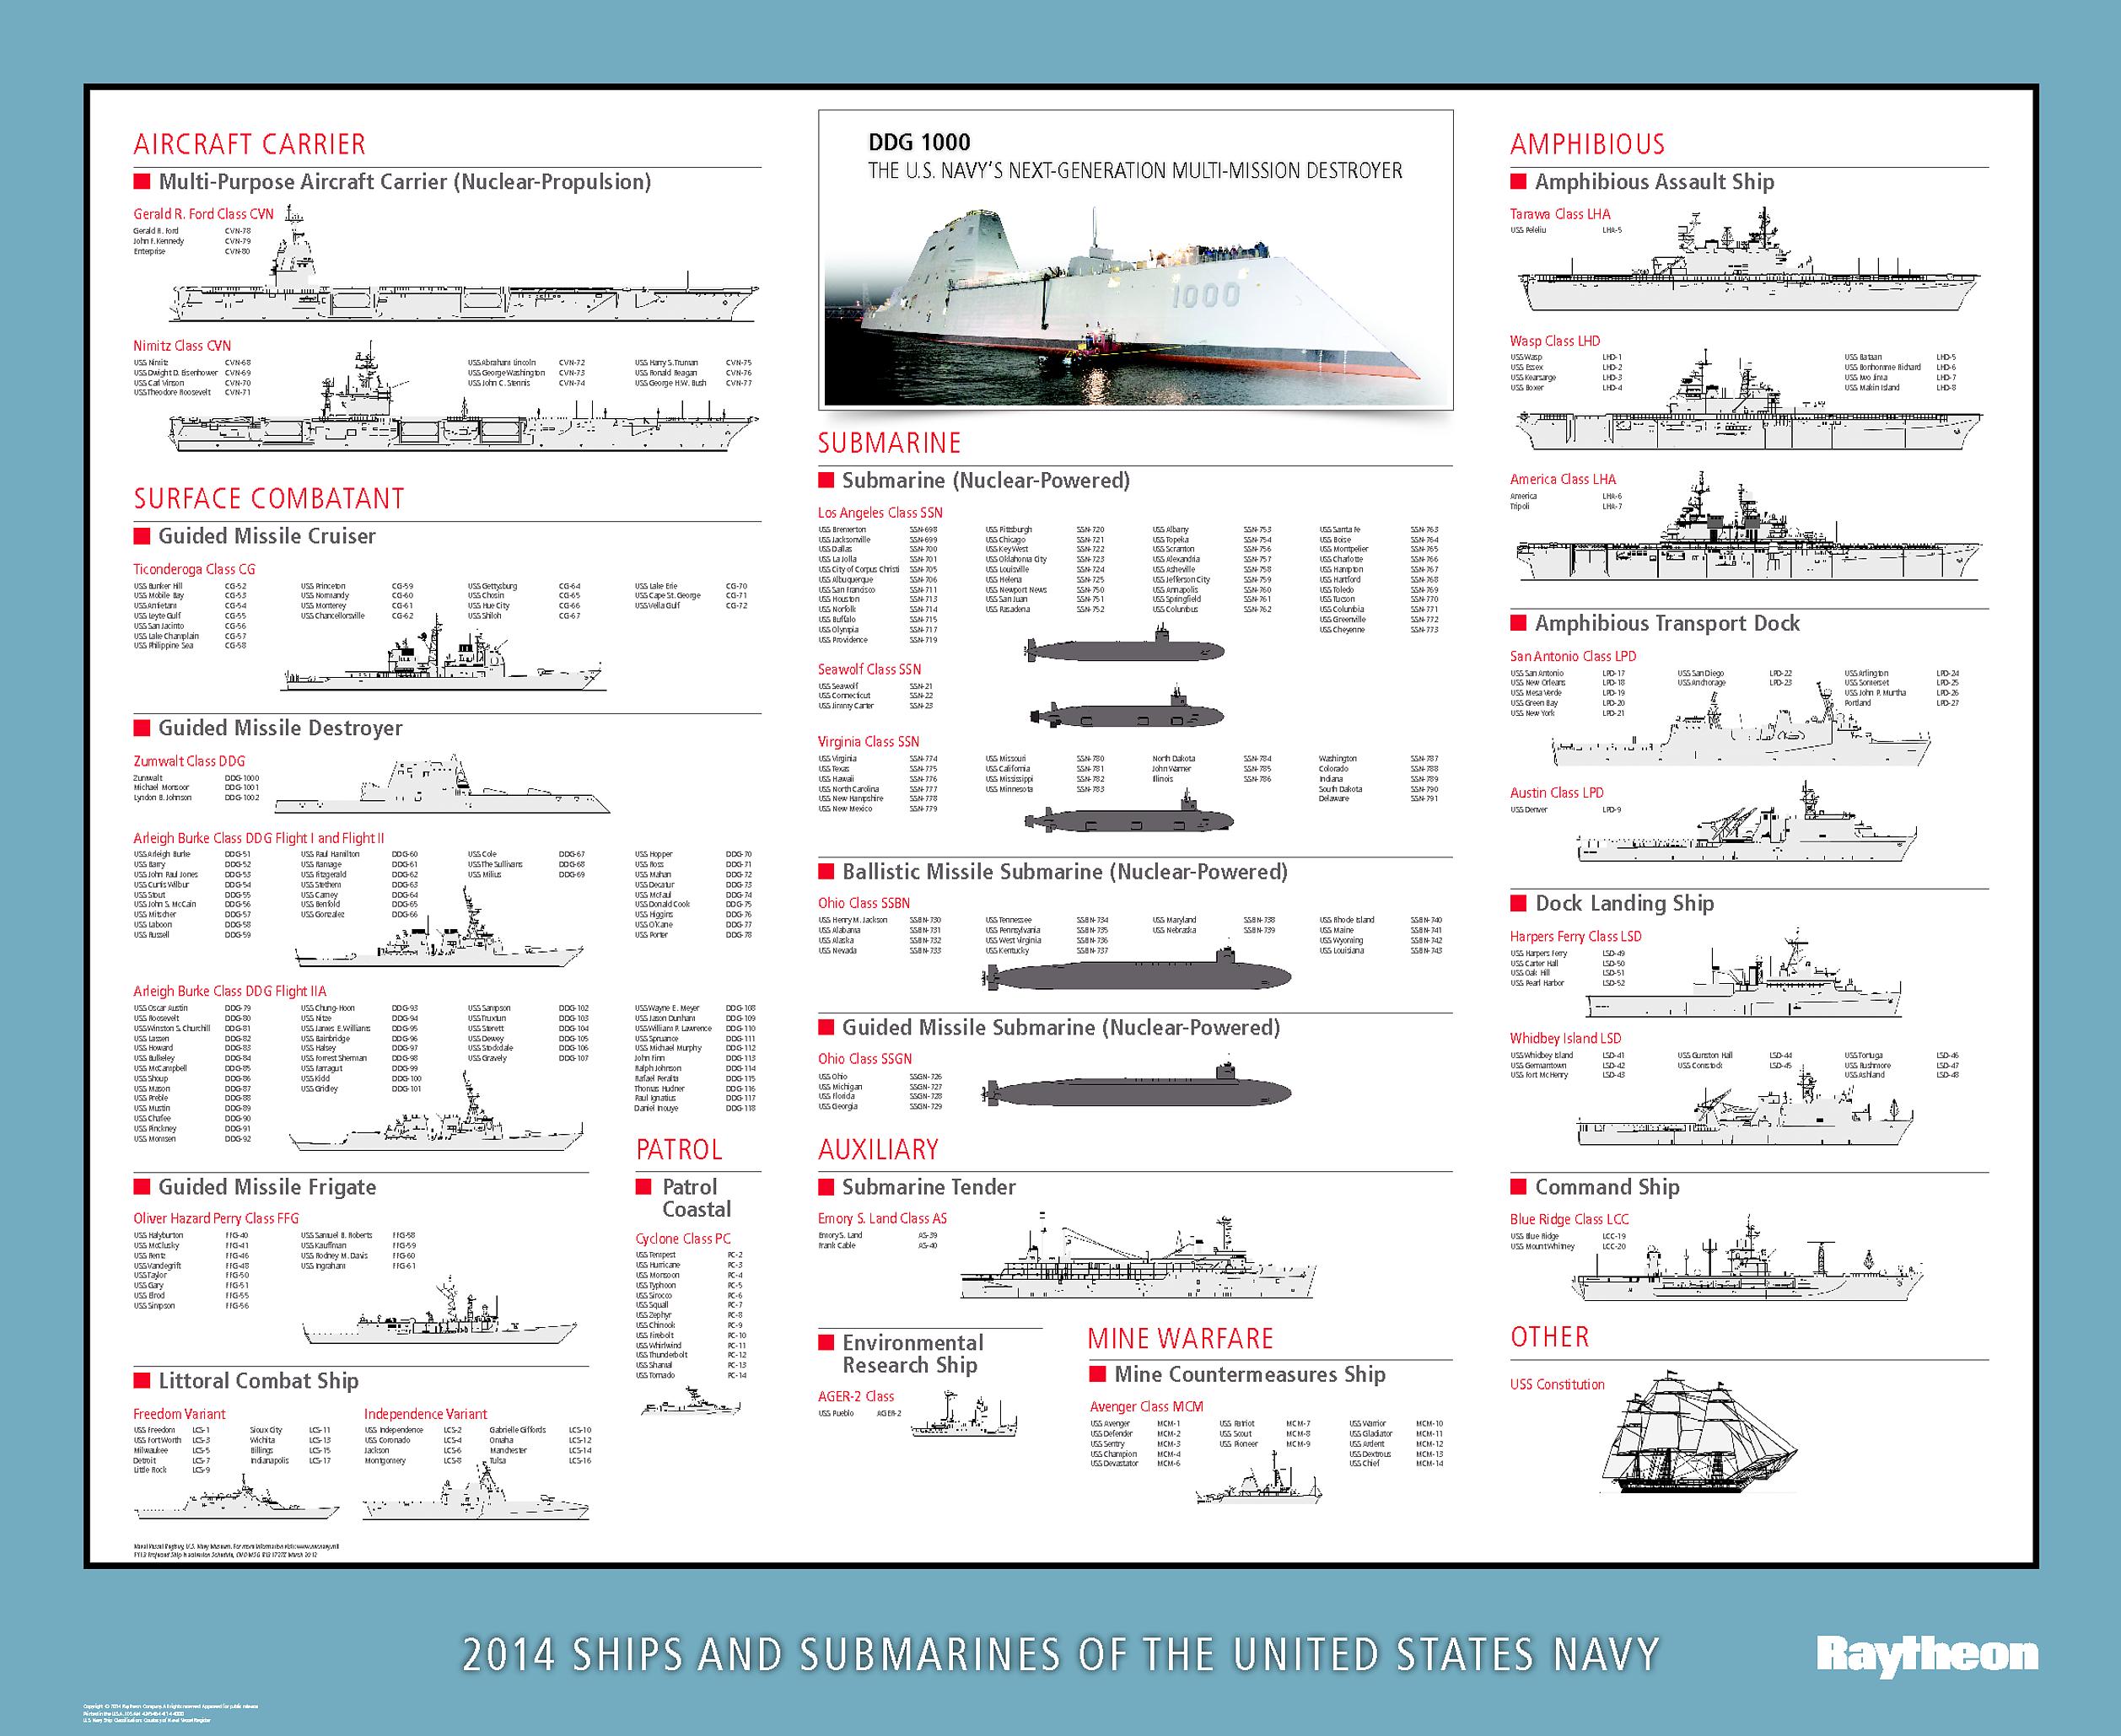 Ships and Submarines of the US Navy 2014.jpg